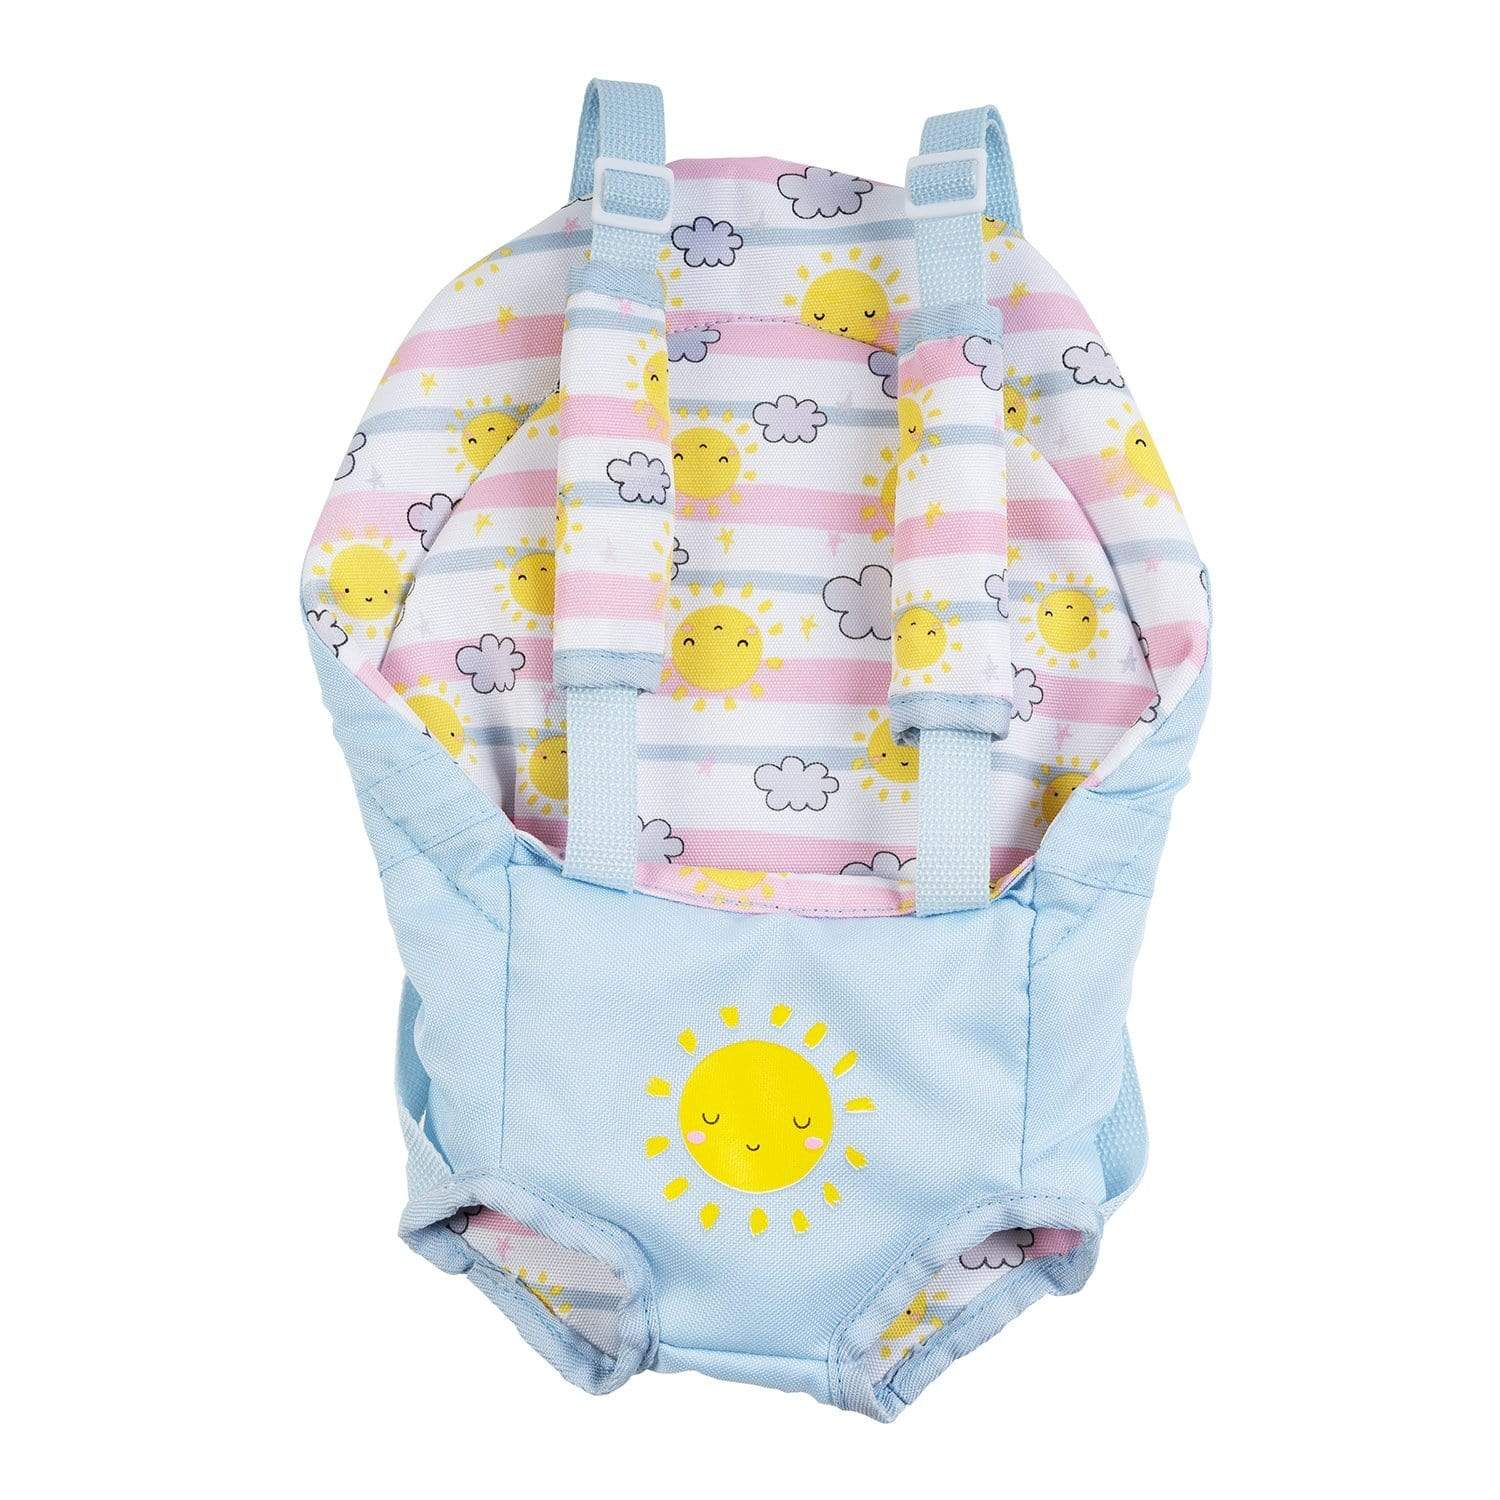 Adora Color-changing Baby Doll Accessory Sunny Days Carrier Snuggle